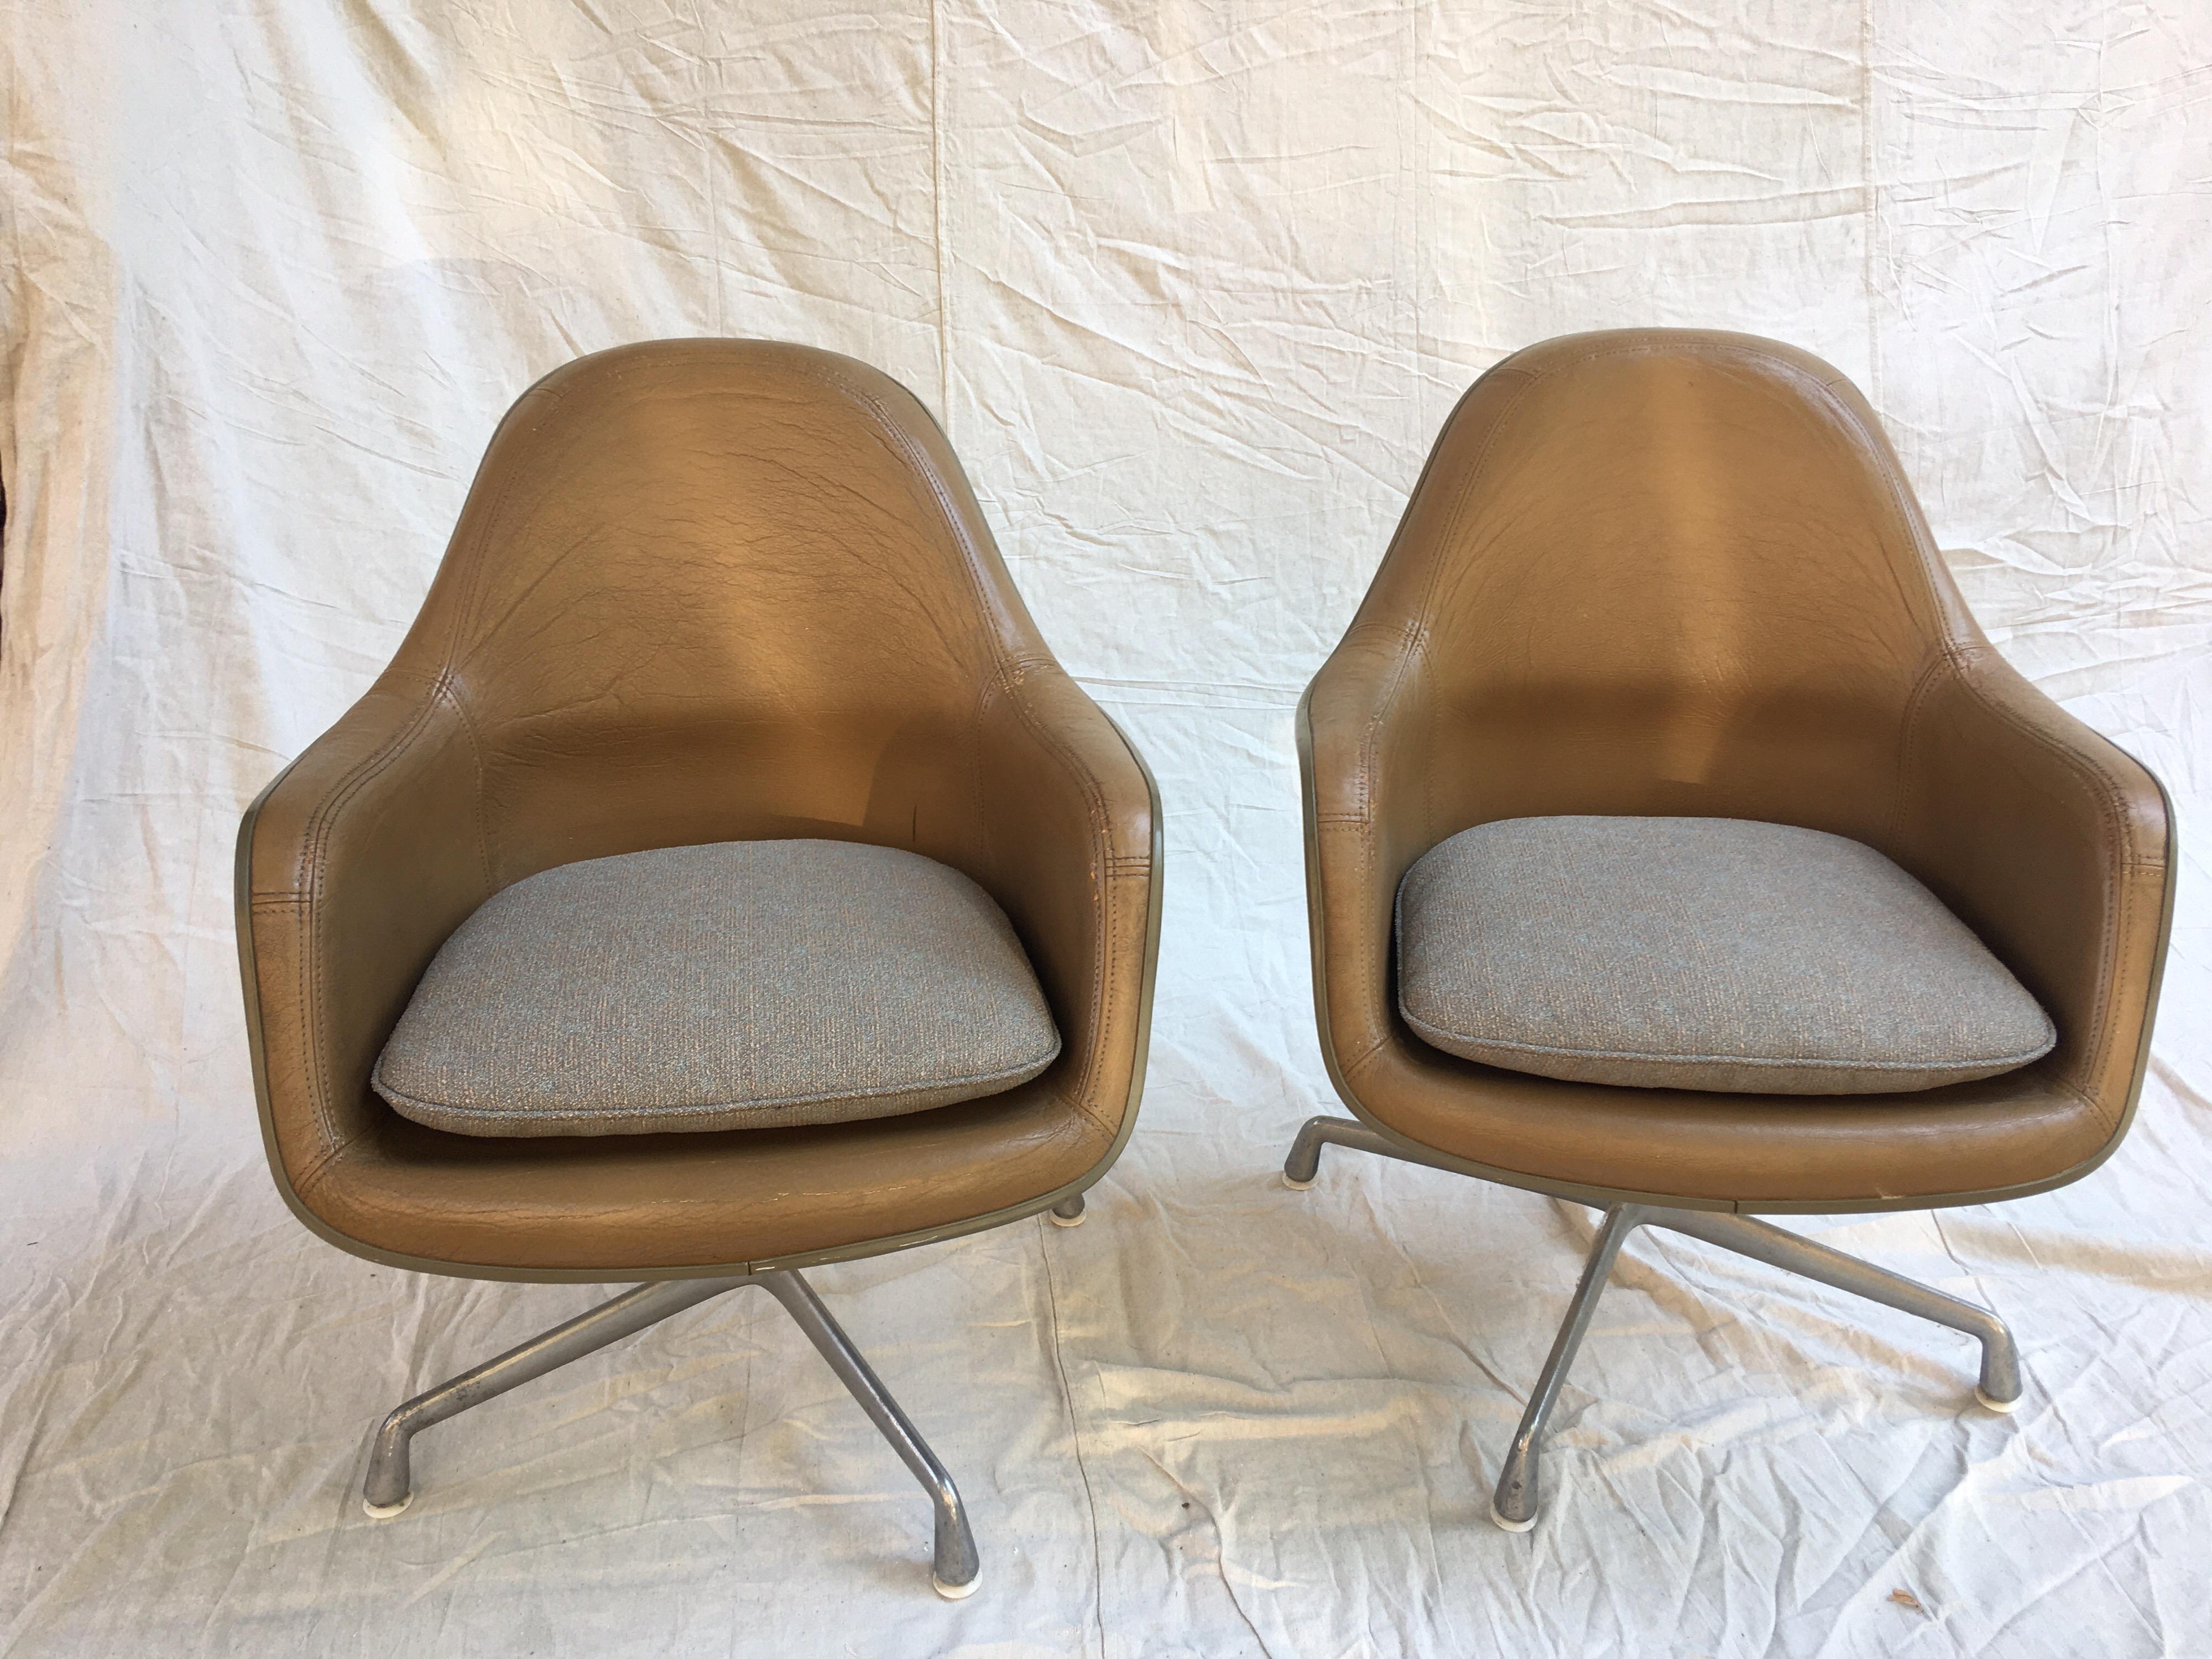 Eames for Herman Miller high back leather lounge chairs. Uncommon pair with aluminum group bases and fiberglass seats. Leather is in good shape with 1 repair on each arm as seen in photos. Chair swivel and seat pads have been re-upholstered.